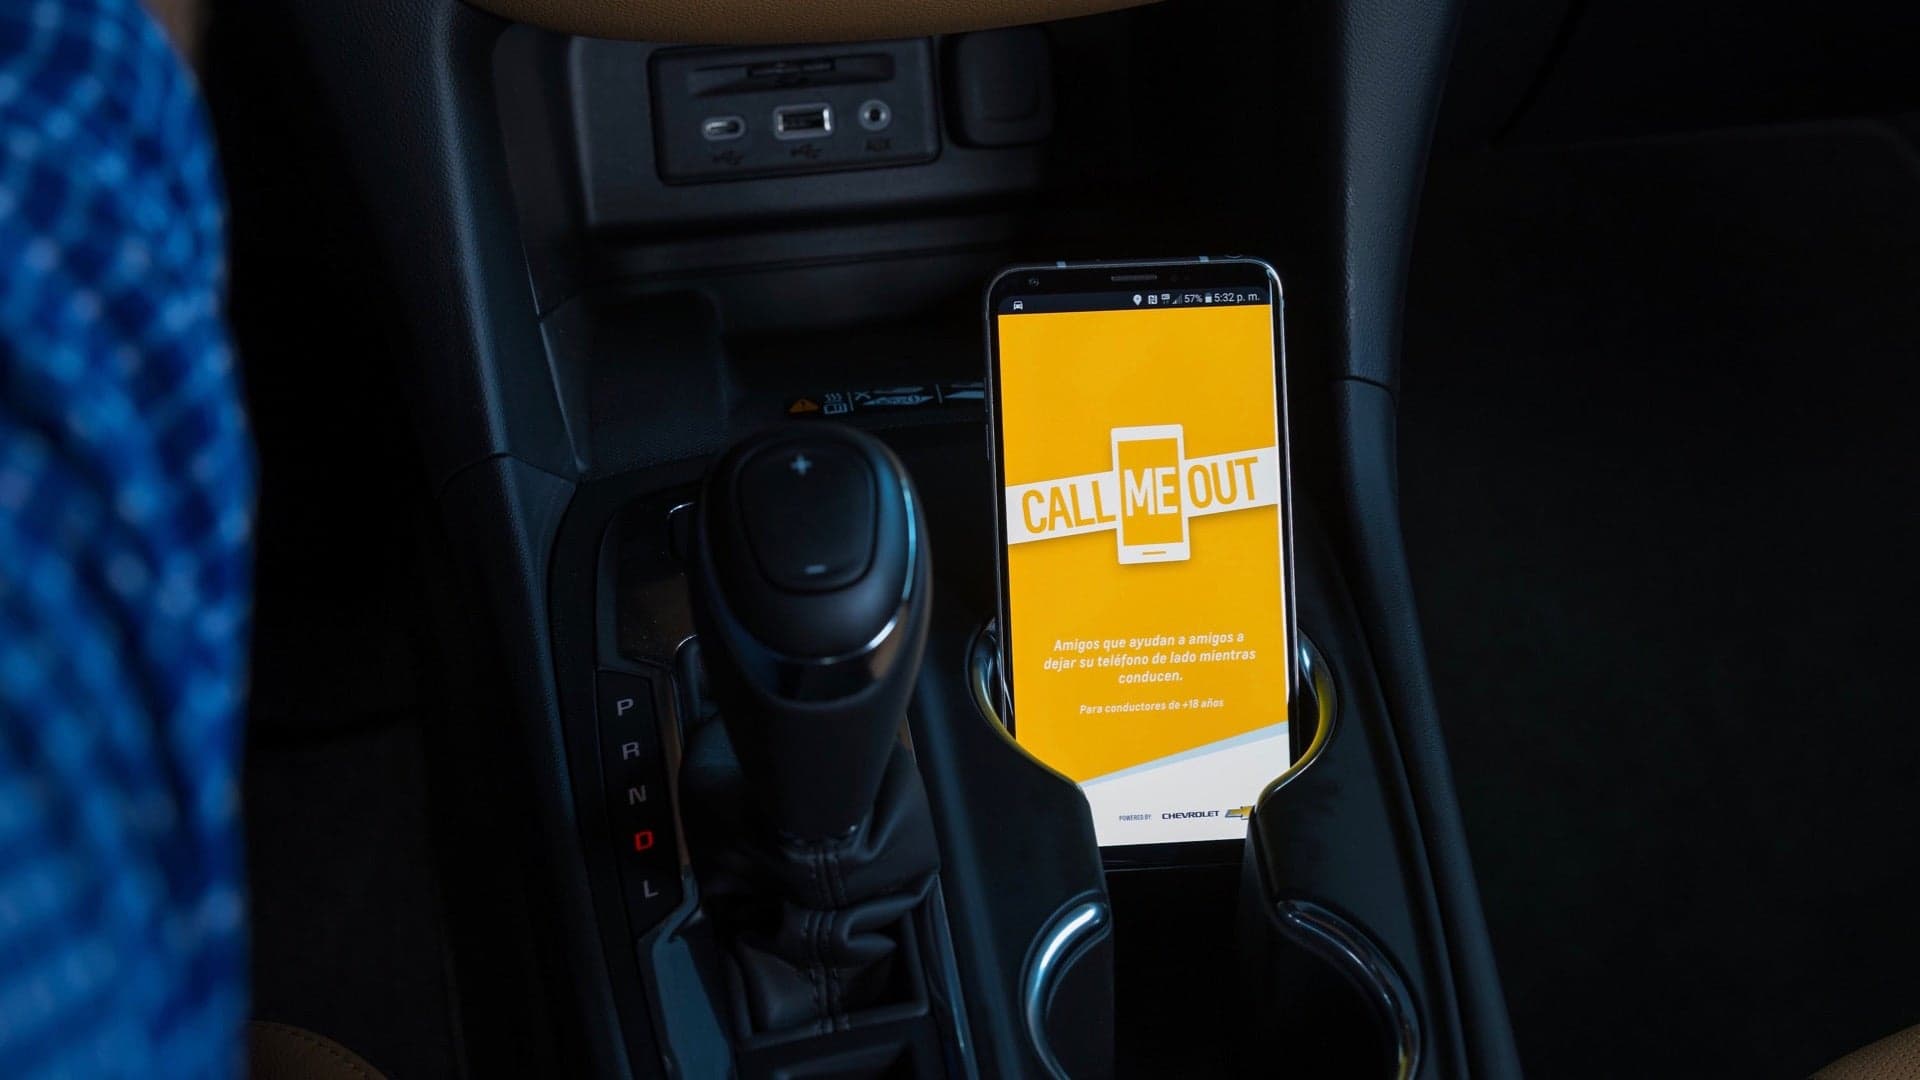 Chevrolet App Uses Guilt, Peer Pressure to Curb Distracted Driving